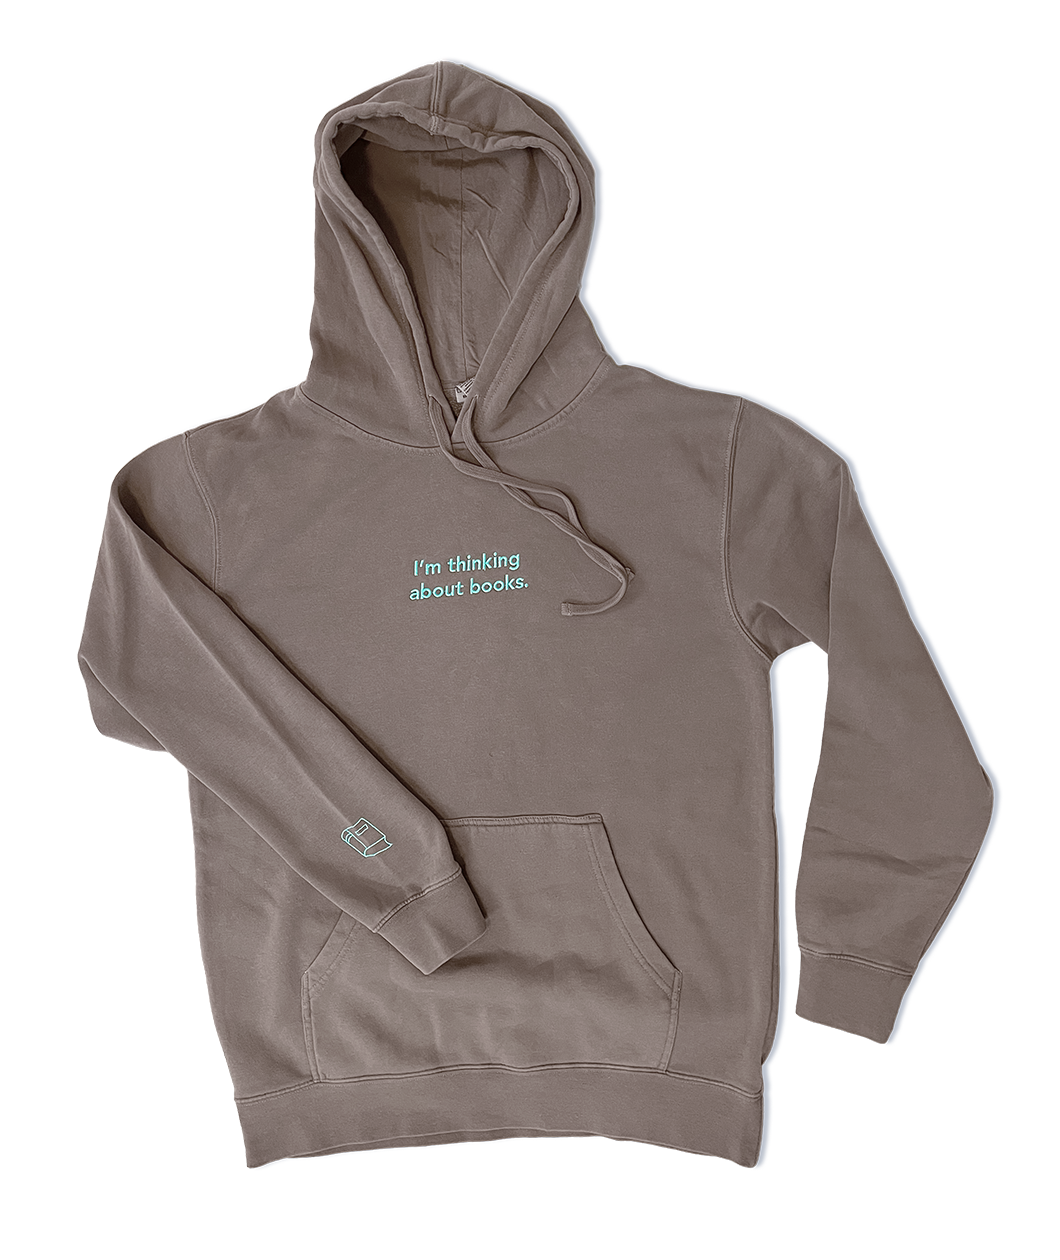 A grey/brown hoodie with the embroidered words "I'm thinking about books." across the chest and a small book on the right cuff in light blue.